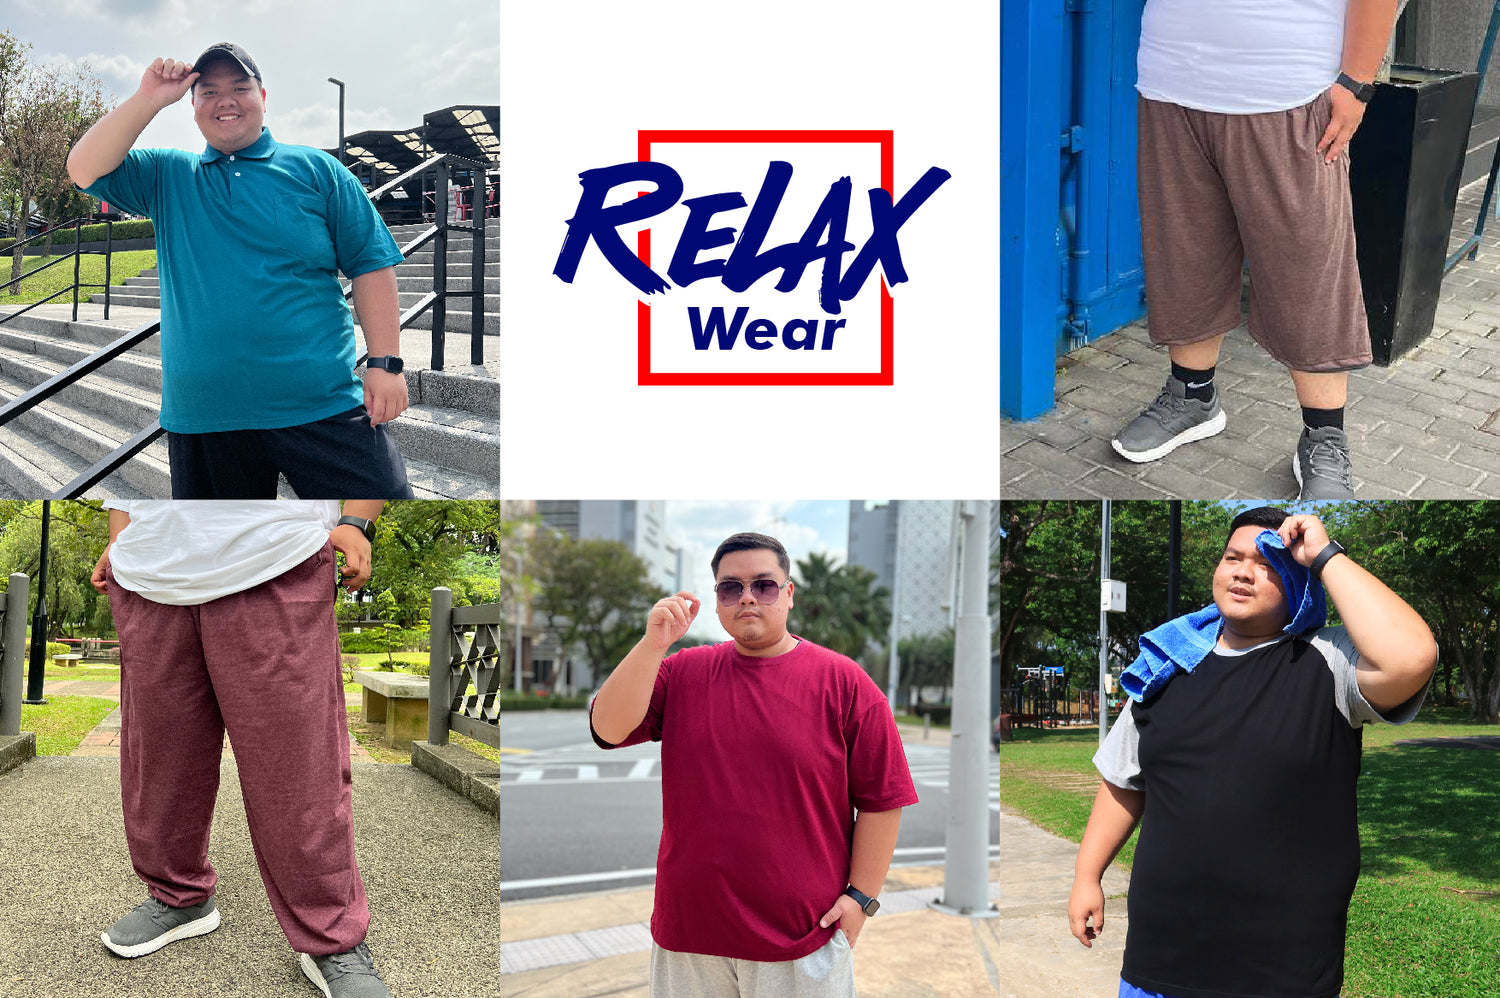 Bob Rock Relax Wear: Unwind in Style, Comfort, and Confidence